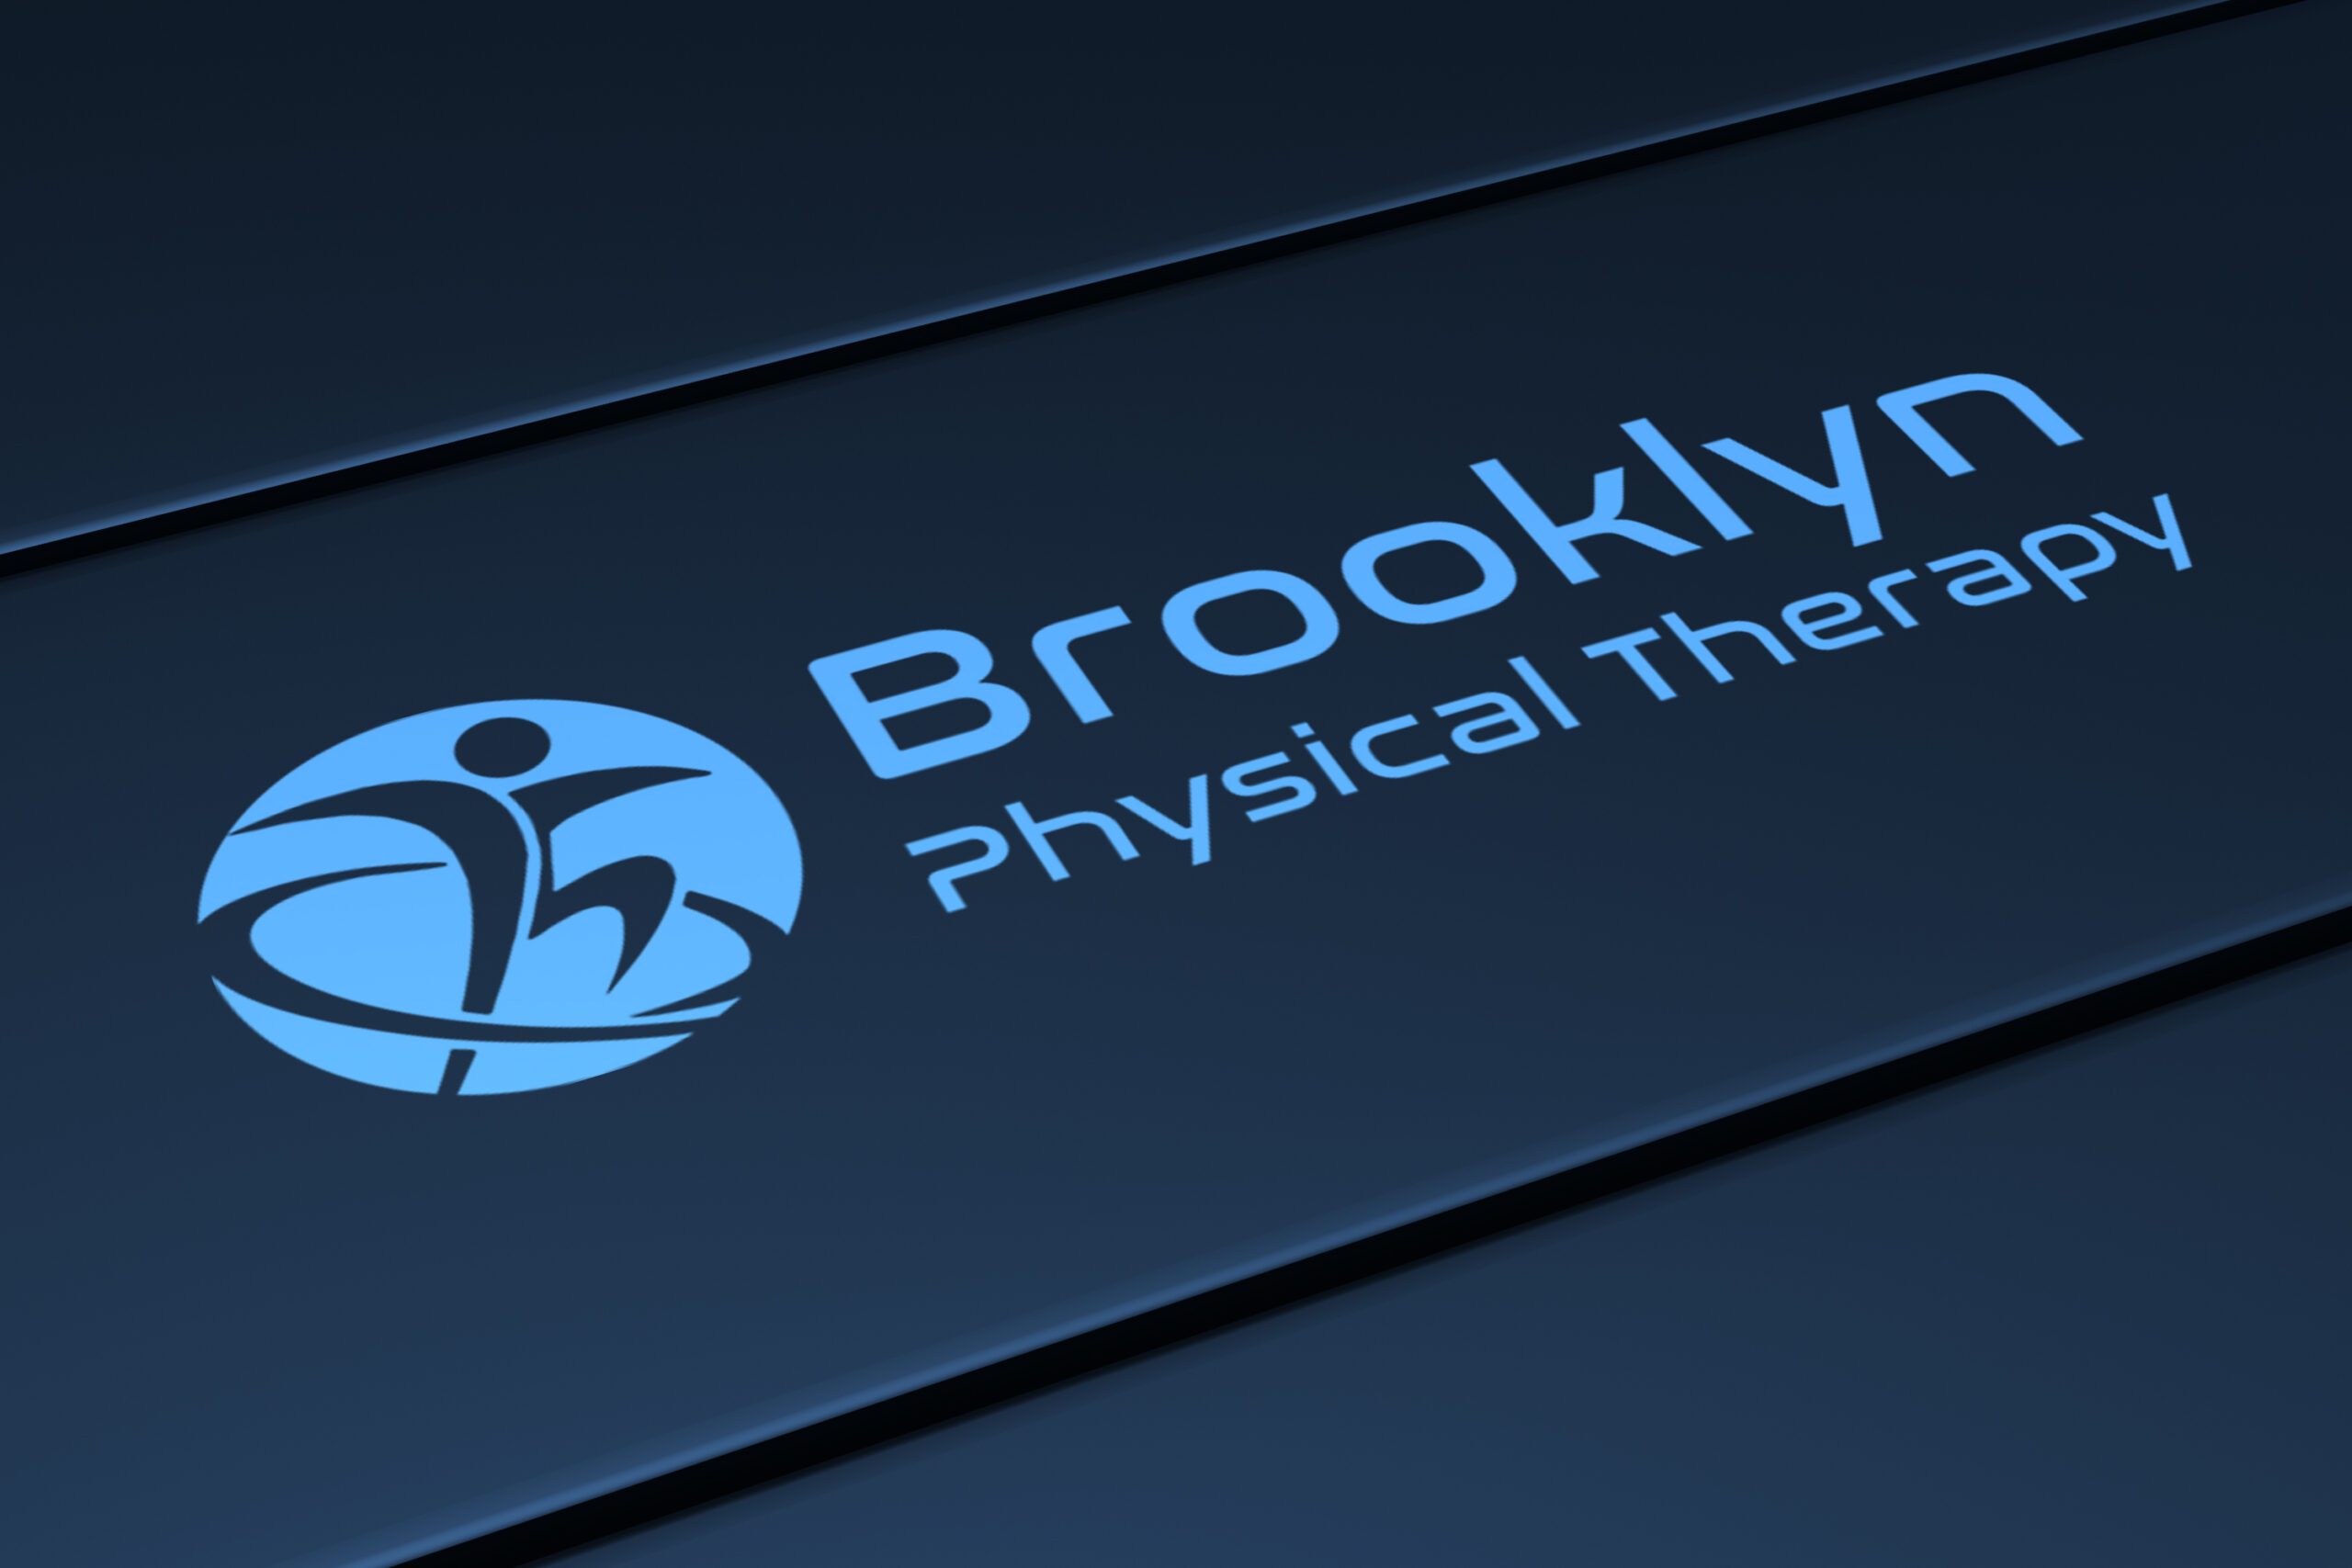 Brooklyn Physical Therapy workers compensation doctor